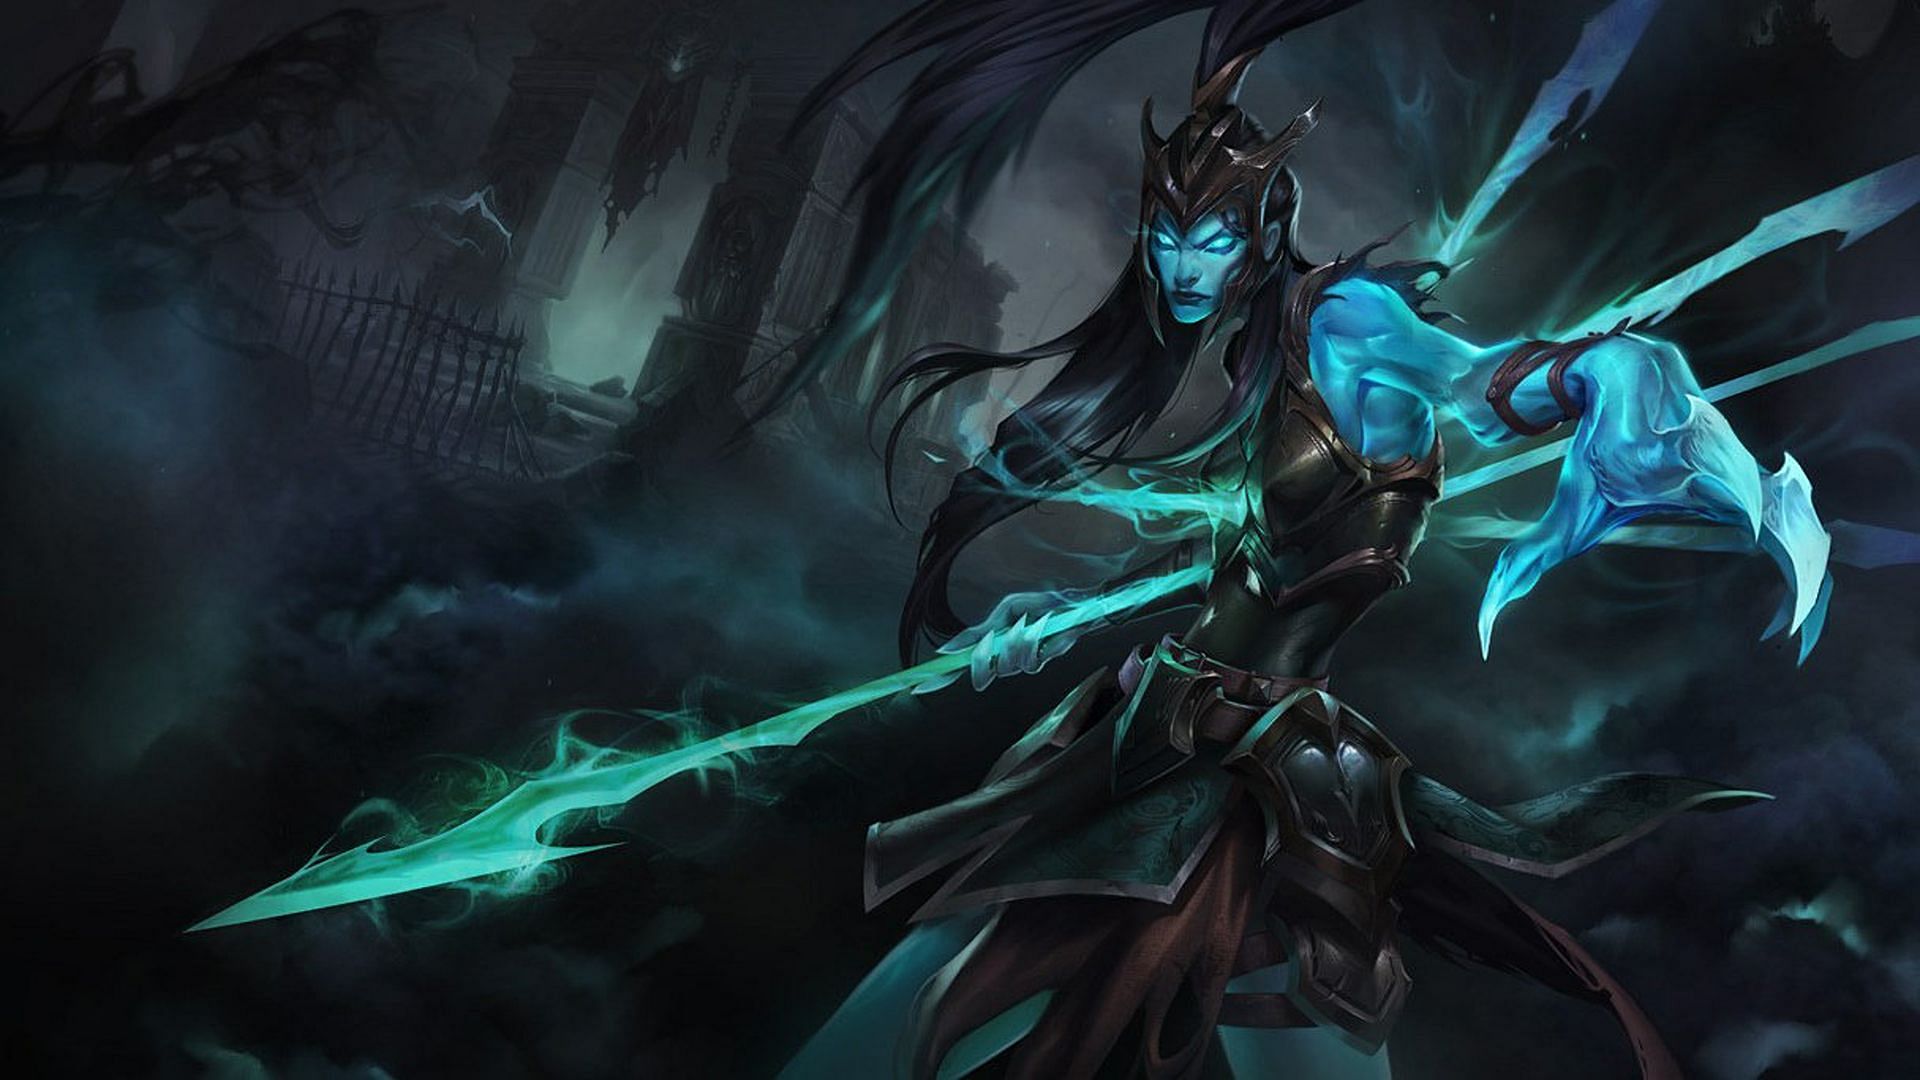 Kalista, the Spear of Vengeance (Image via Riot Games)